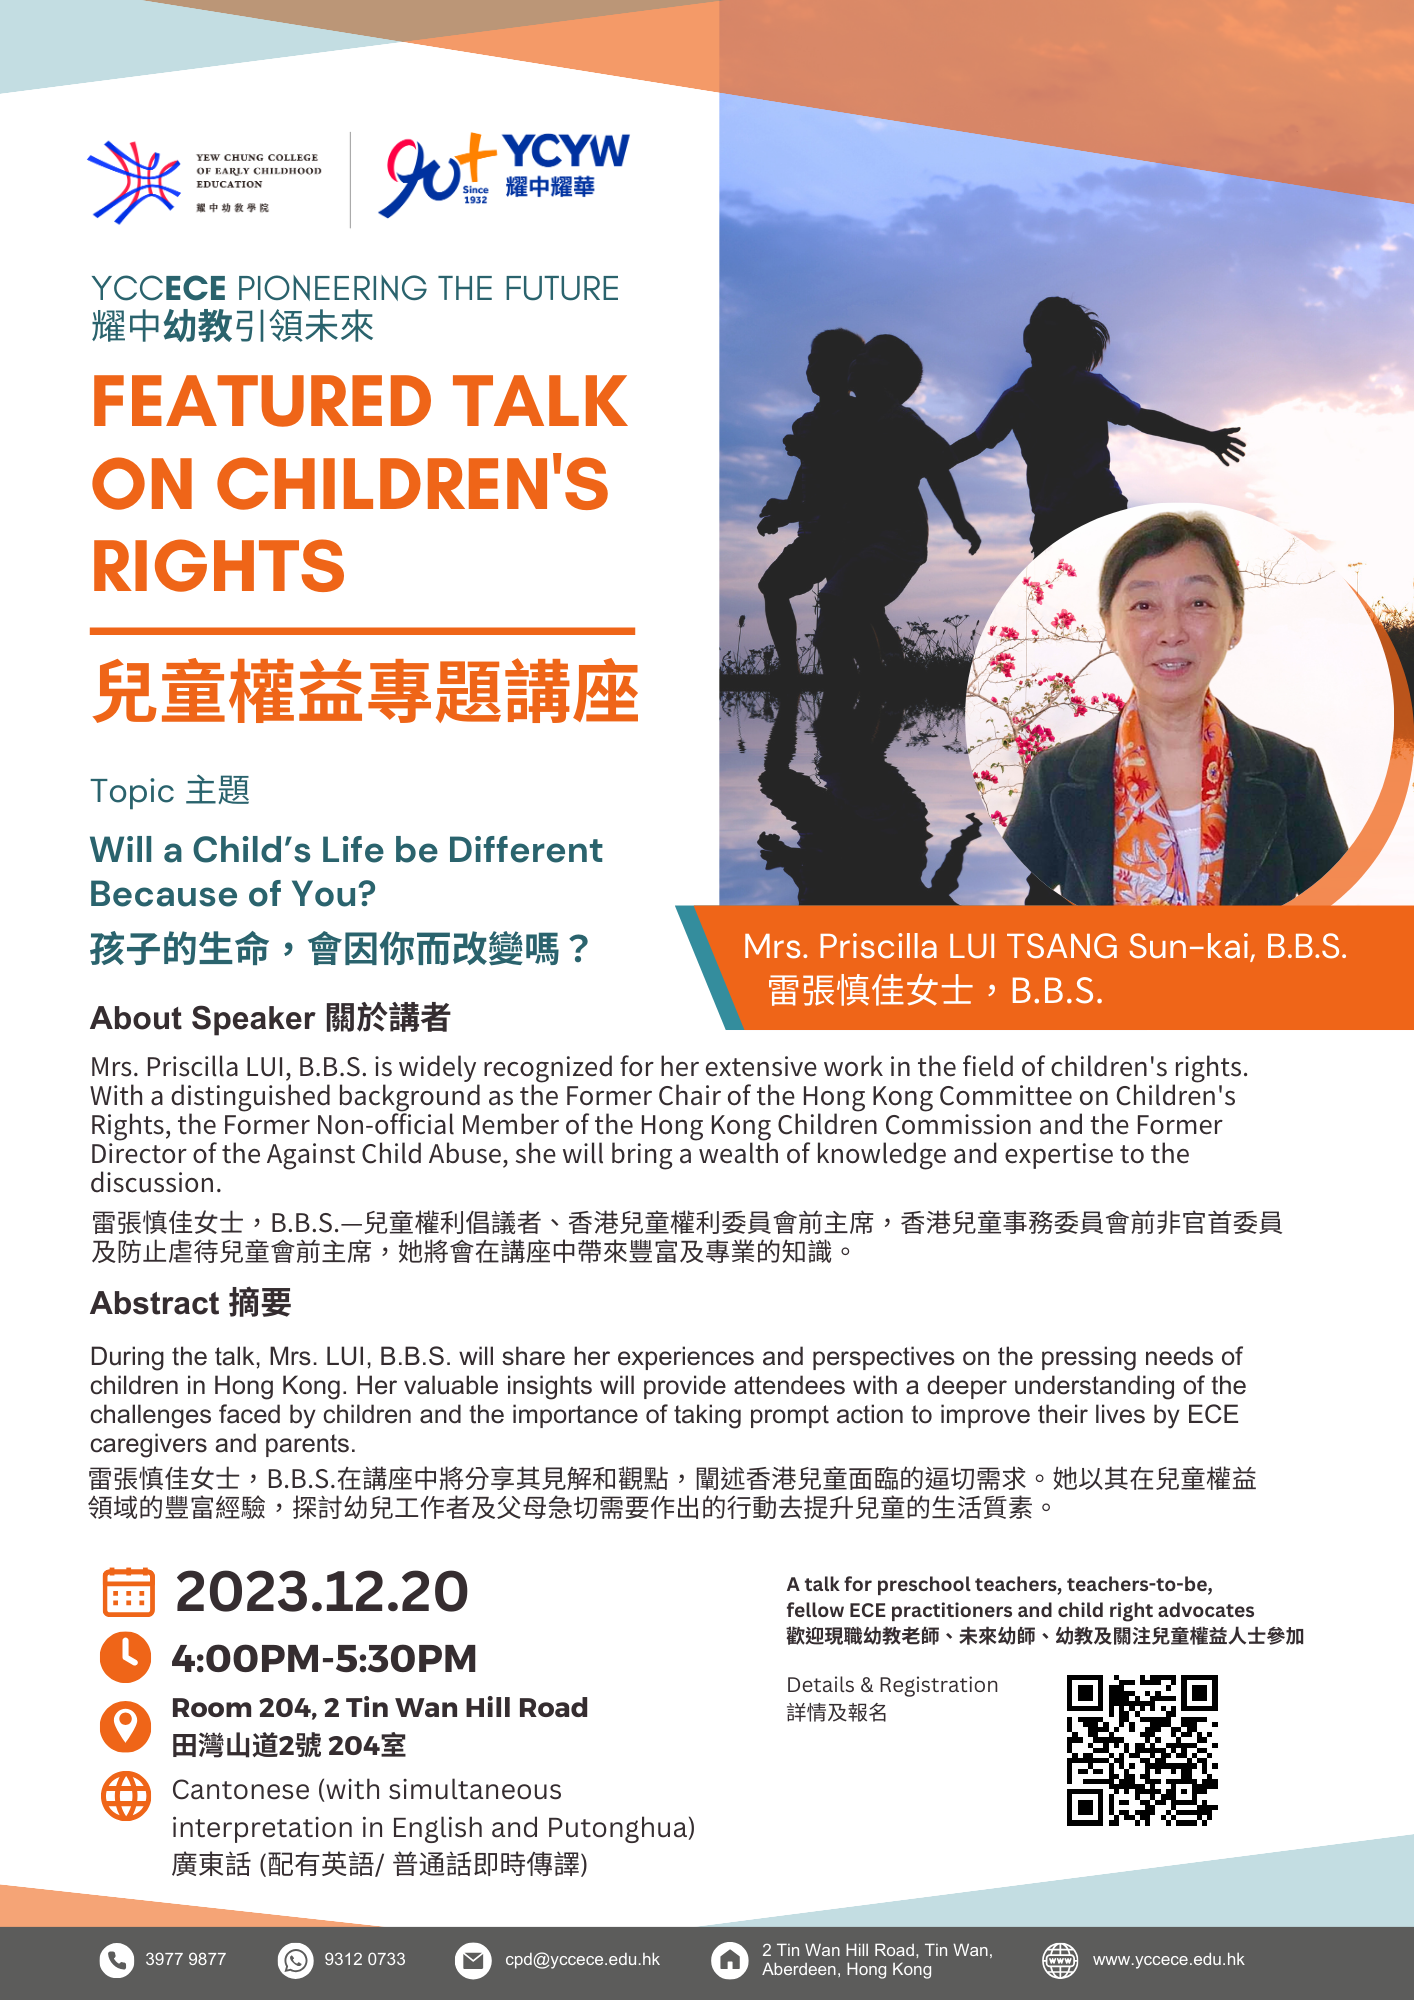 Featured Talk on Children's Rights - "Will a Child’s Life be Different Because of You?"